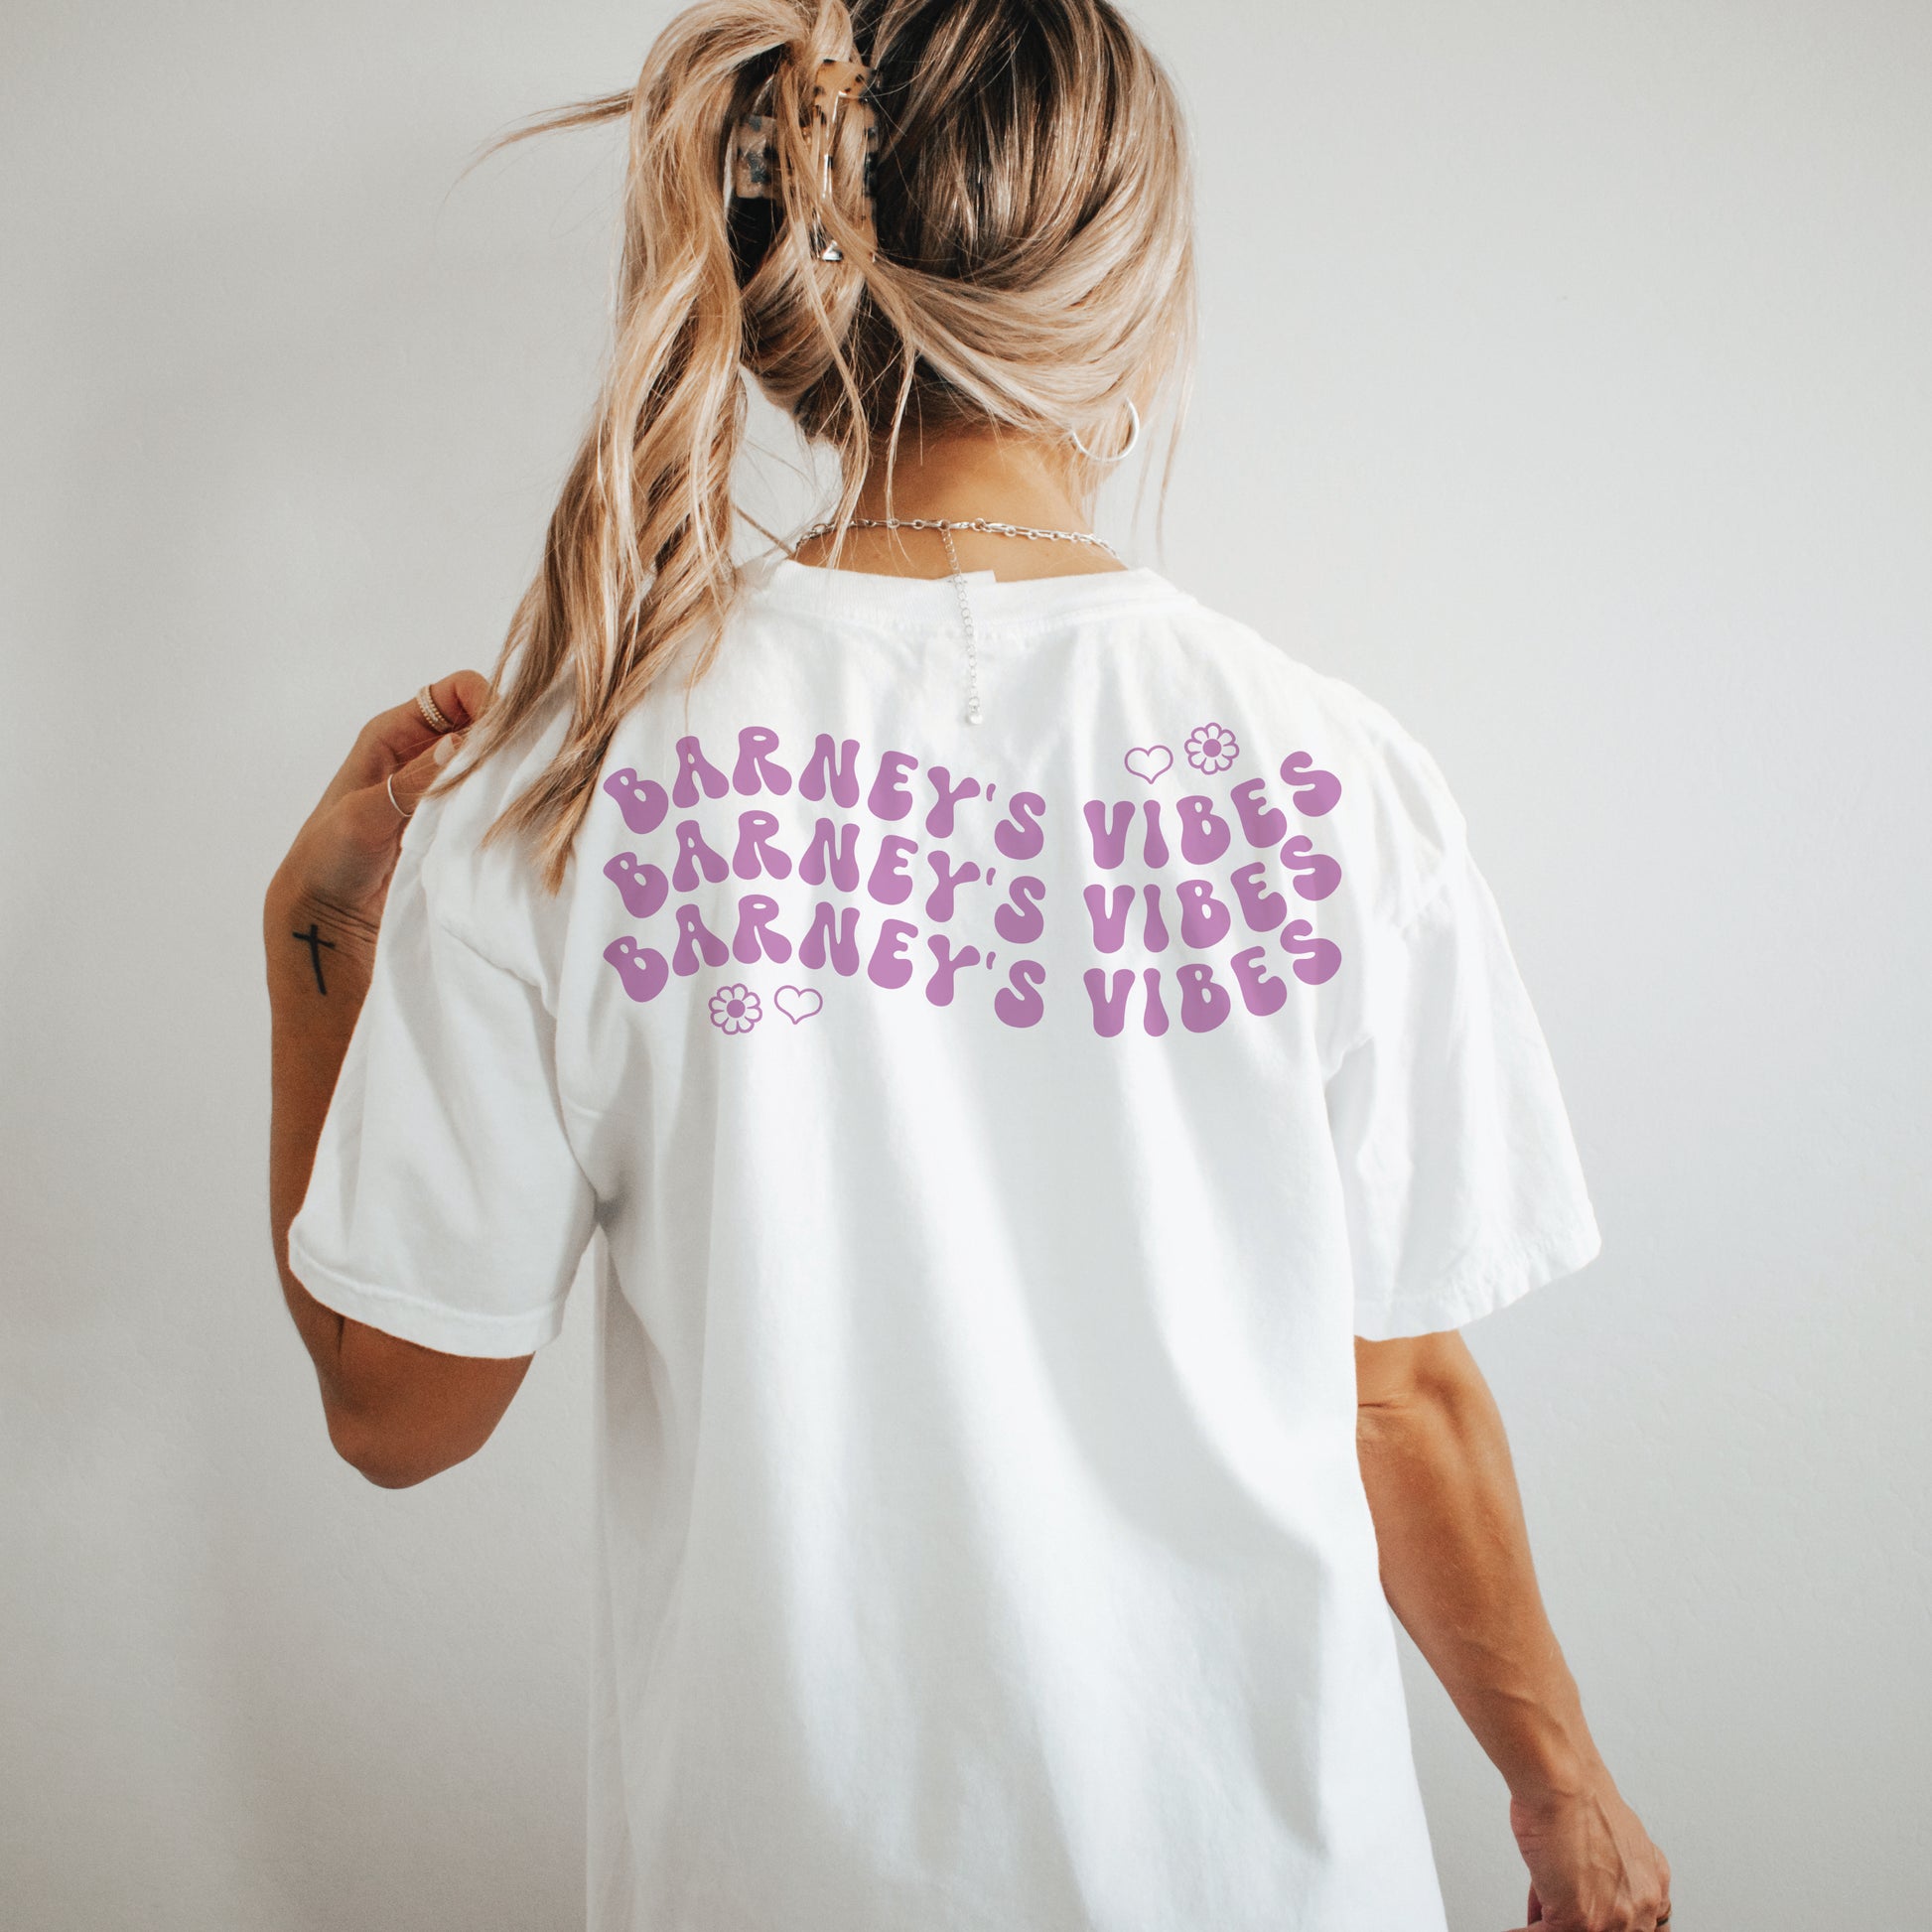 Barney's Vibes | BARNEY'S BEANERY - Women's Smiley Face Tee | Berry Wavy Text Graphic On White T-Shirt, Back View Female Lifestyle Image